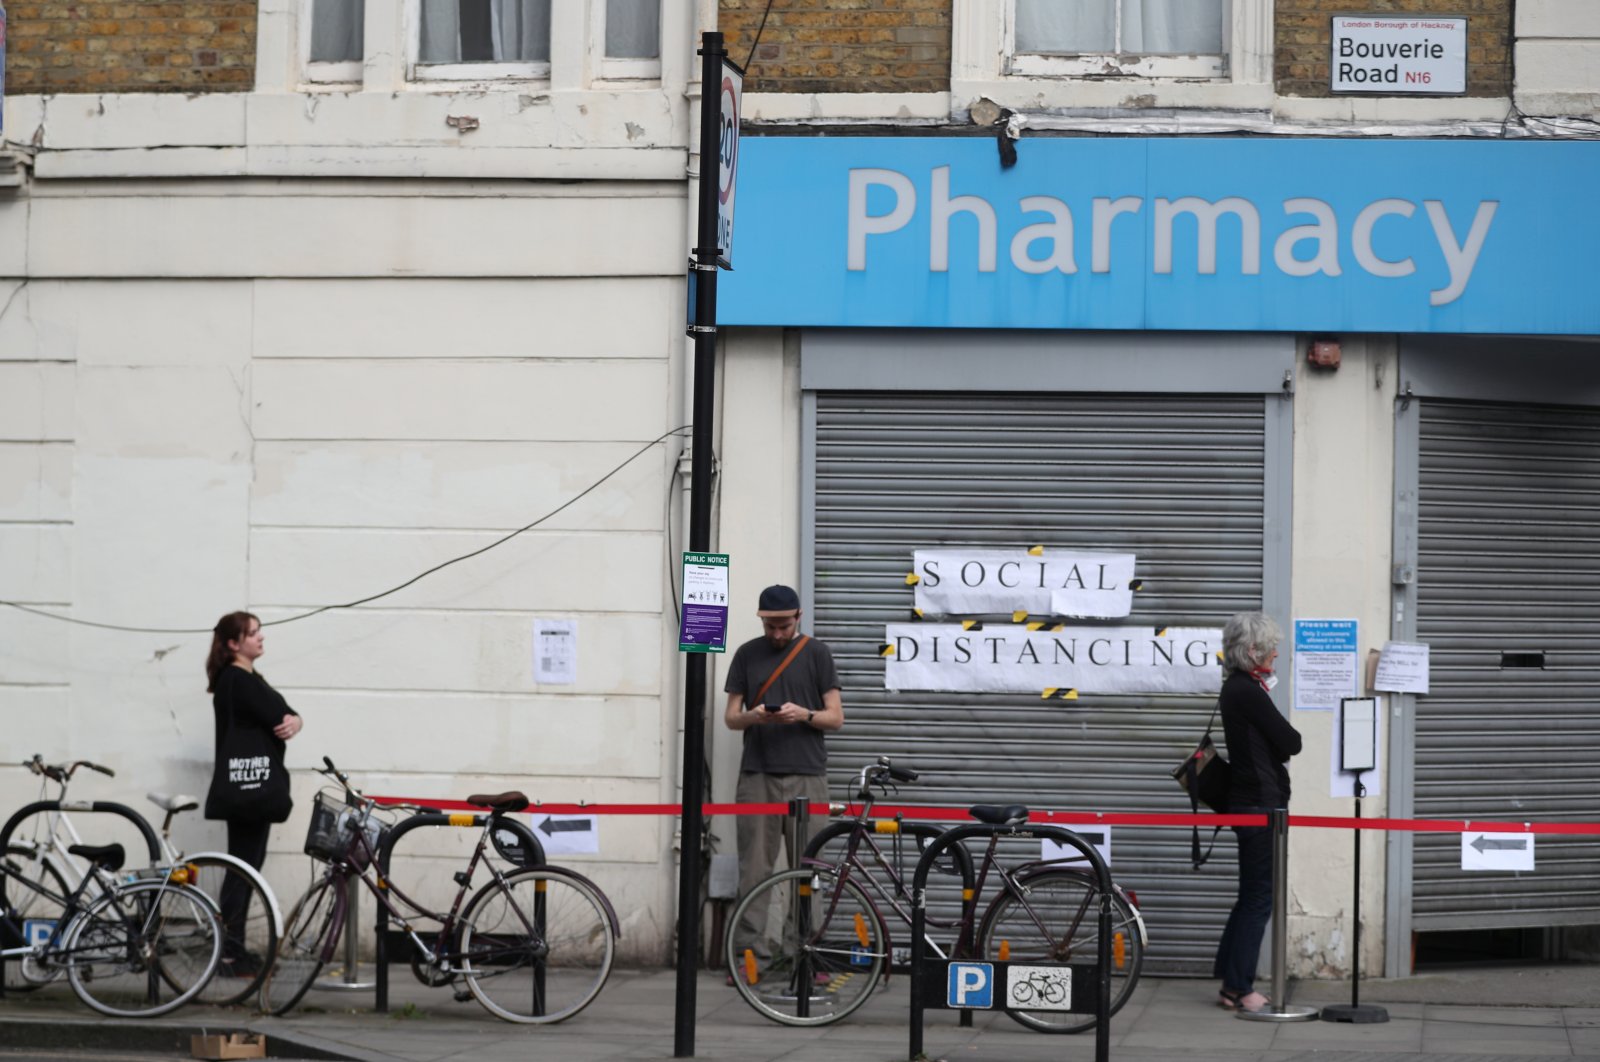 People are seen following social distancing rules as they queue outside a pharmacy in Stoke Newington, London, April 8, 2020. (REUTERS Photo)